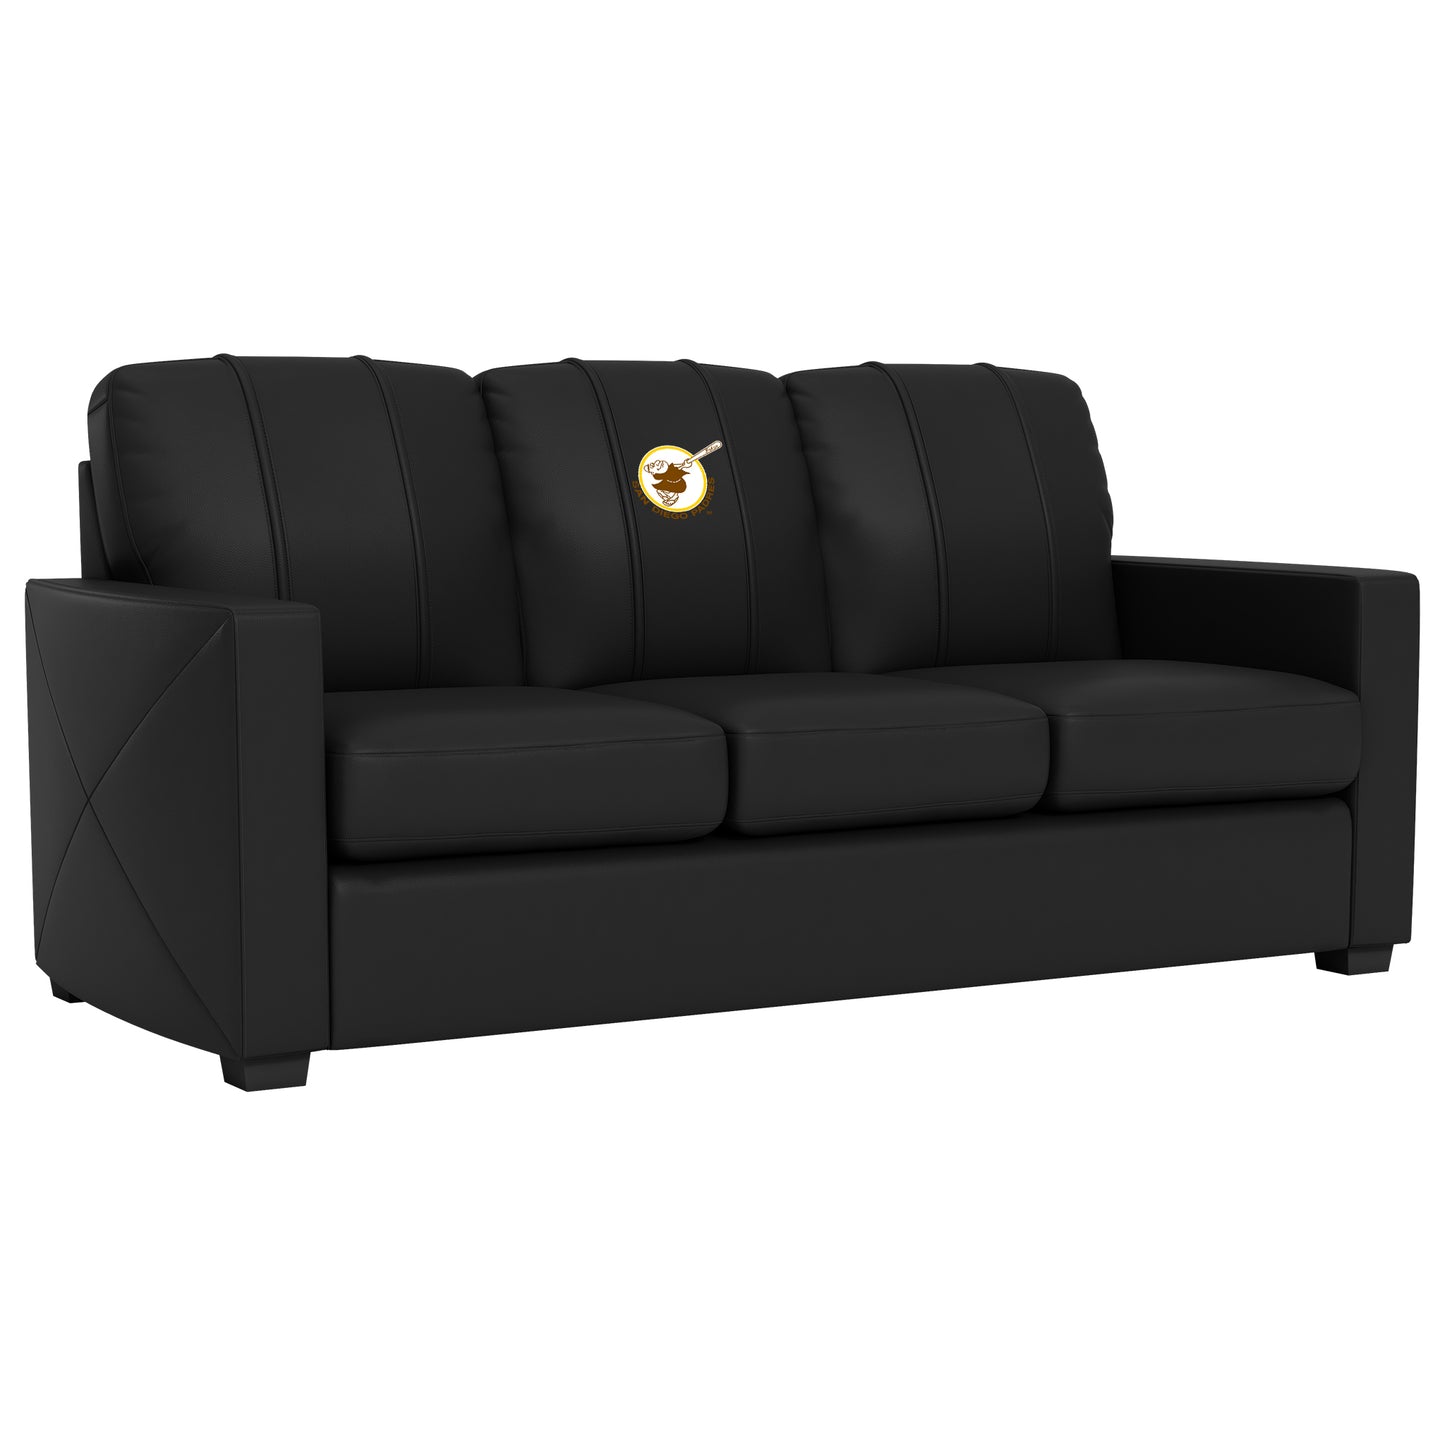 Silver Sofa with San Diego Padres Cooperstown